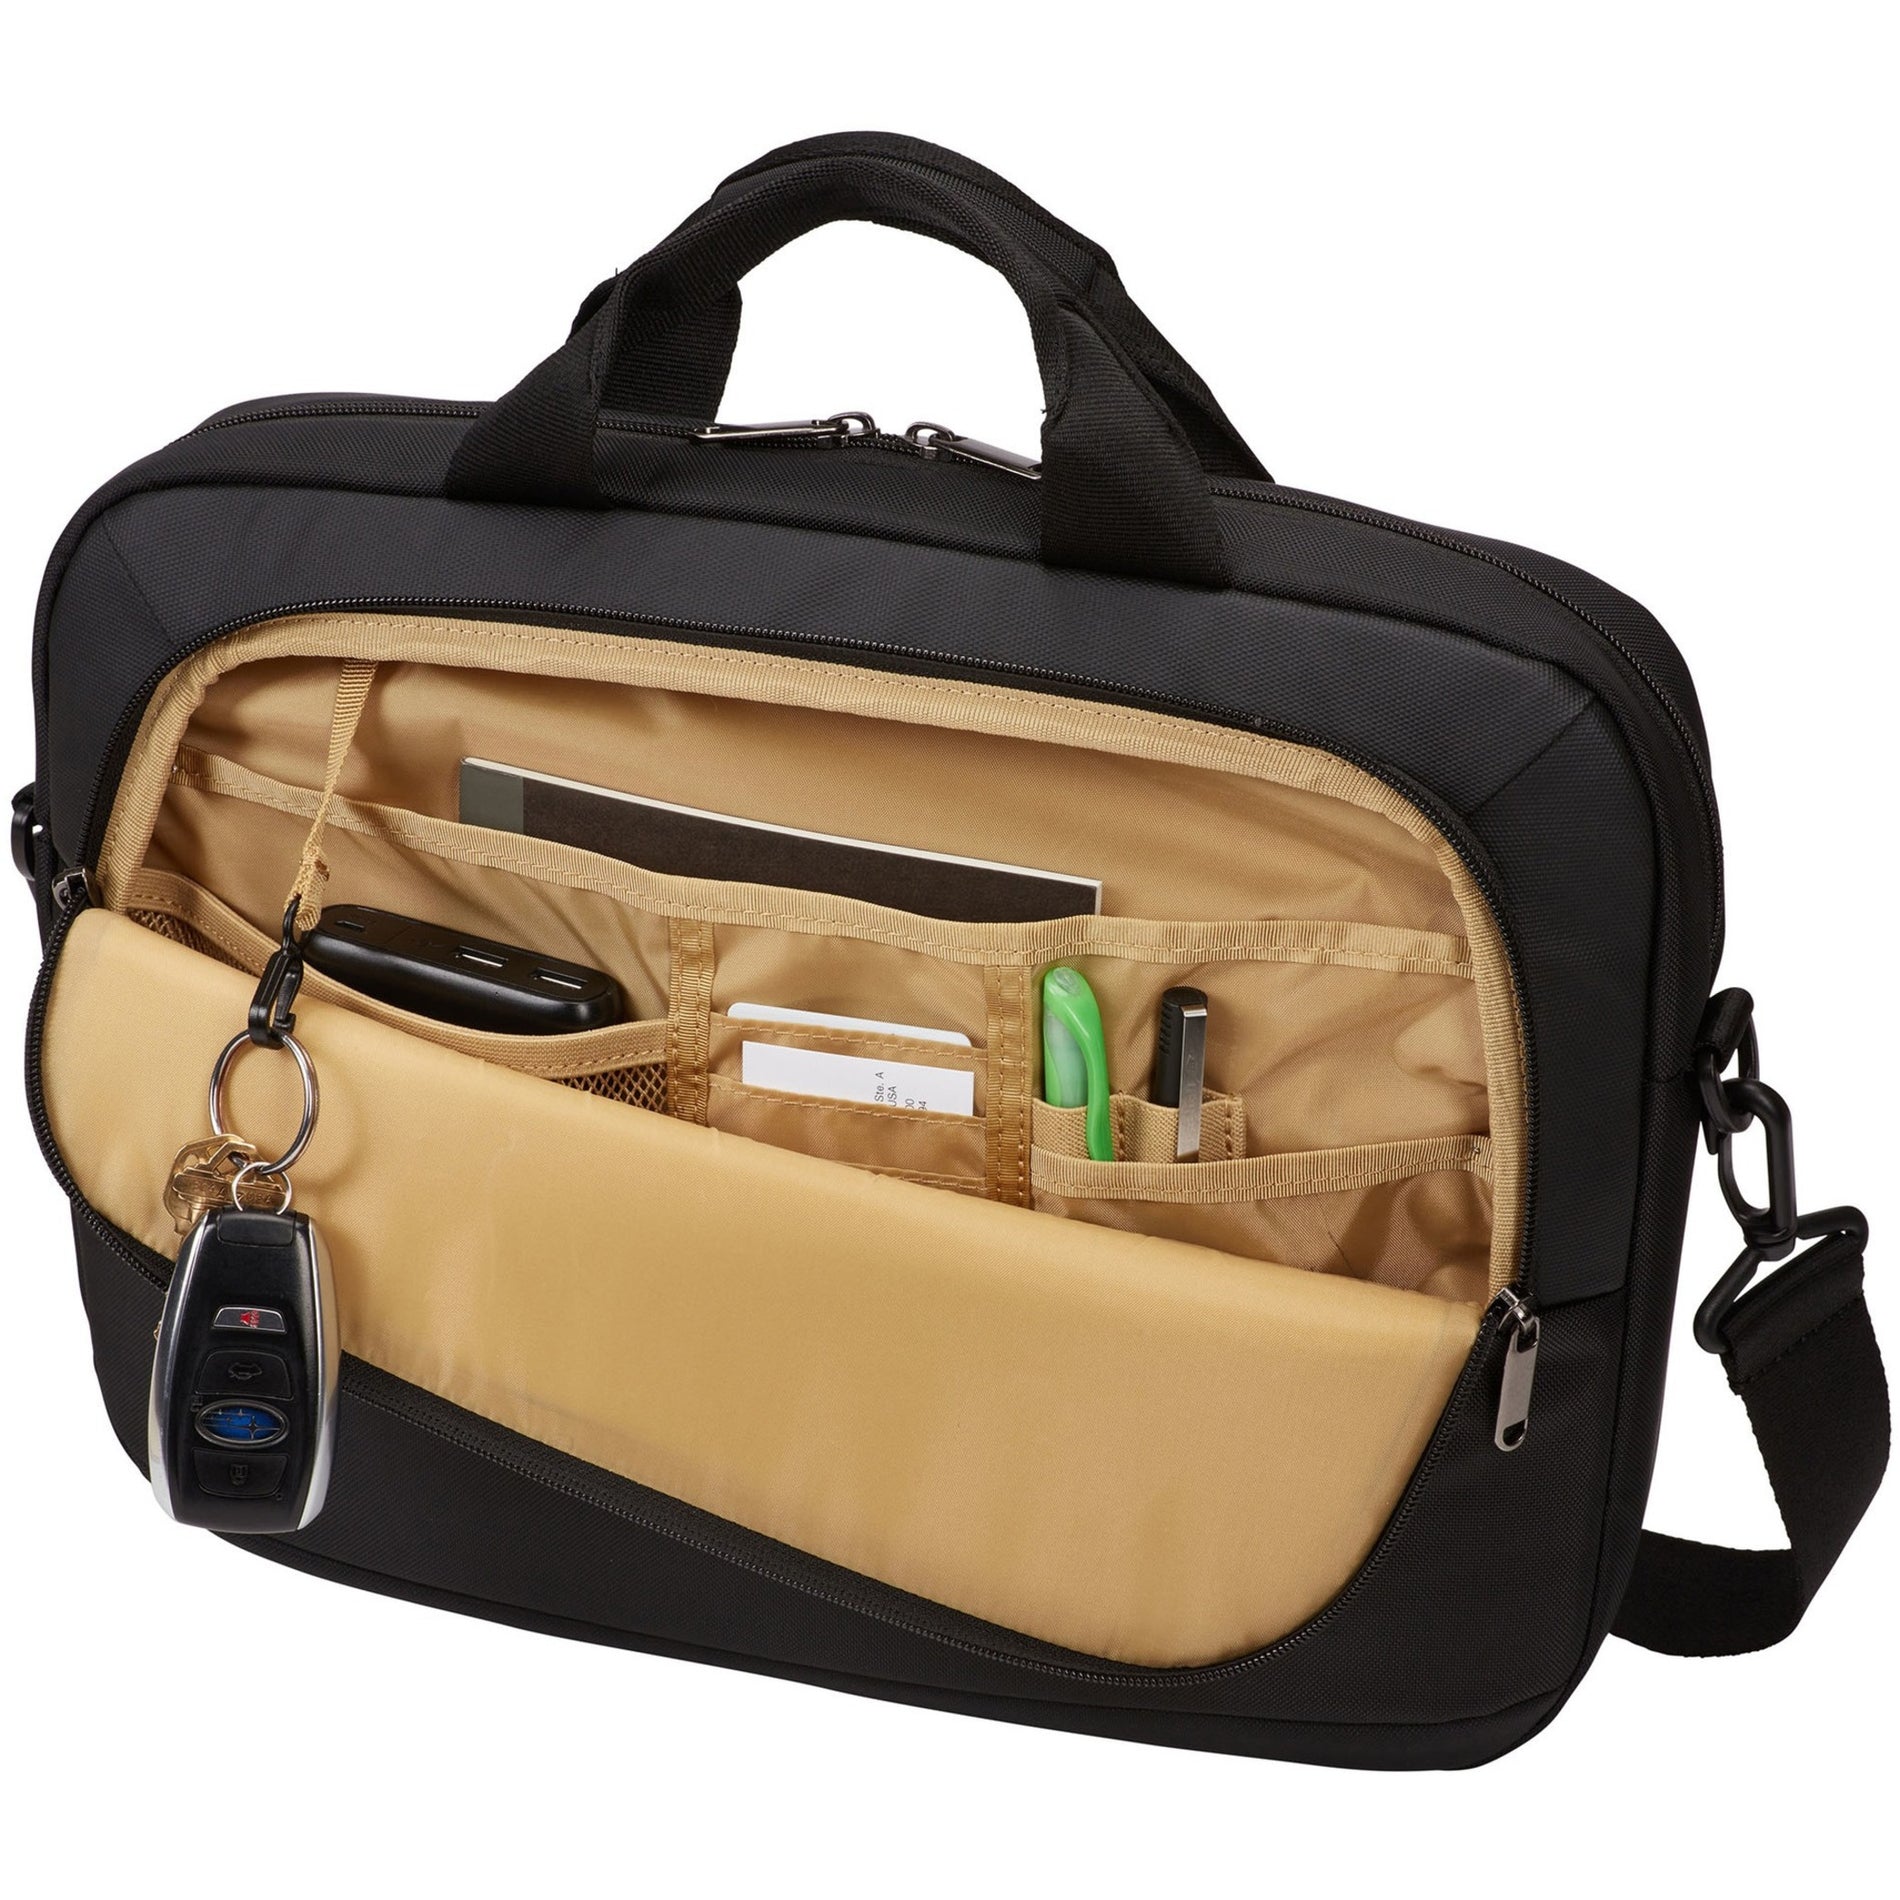 Case Logic 3204526 PROPEL ATT 14IN BLACK, Travel/Luggage Case with Laptop and Tablet Compartment